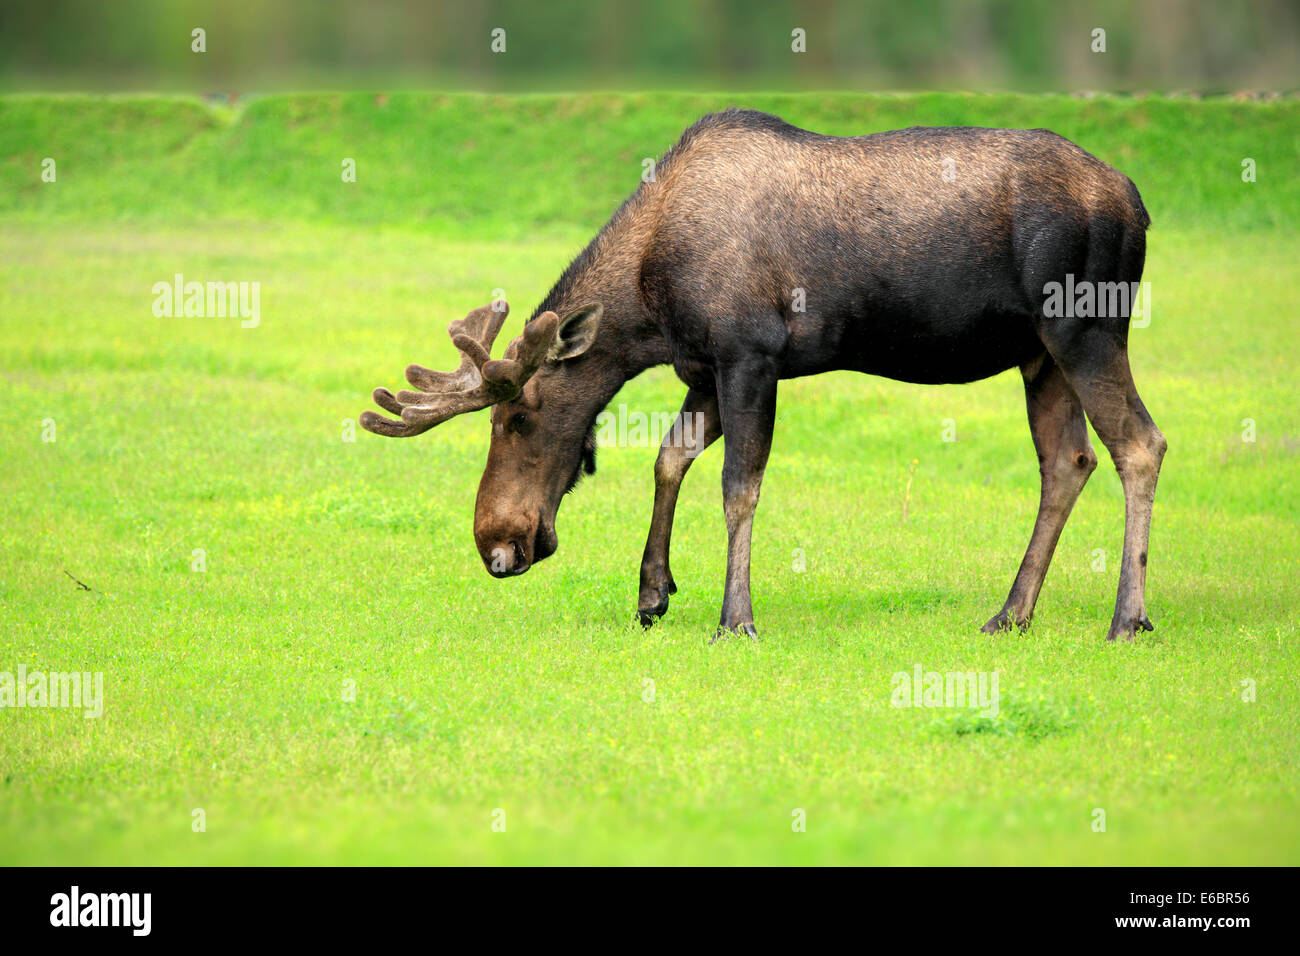 Moose (Alces alces), adult, male, Alaska Wildlife Conservation Center, Anchorage, Alaska, United States Stock Photo